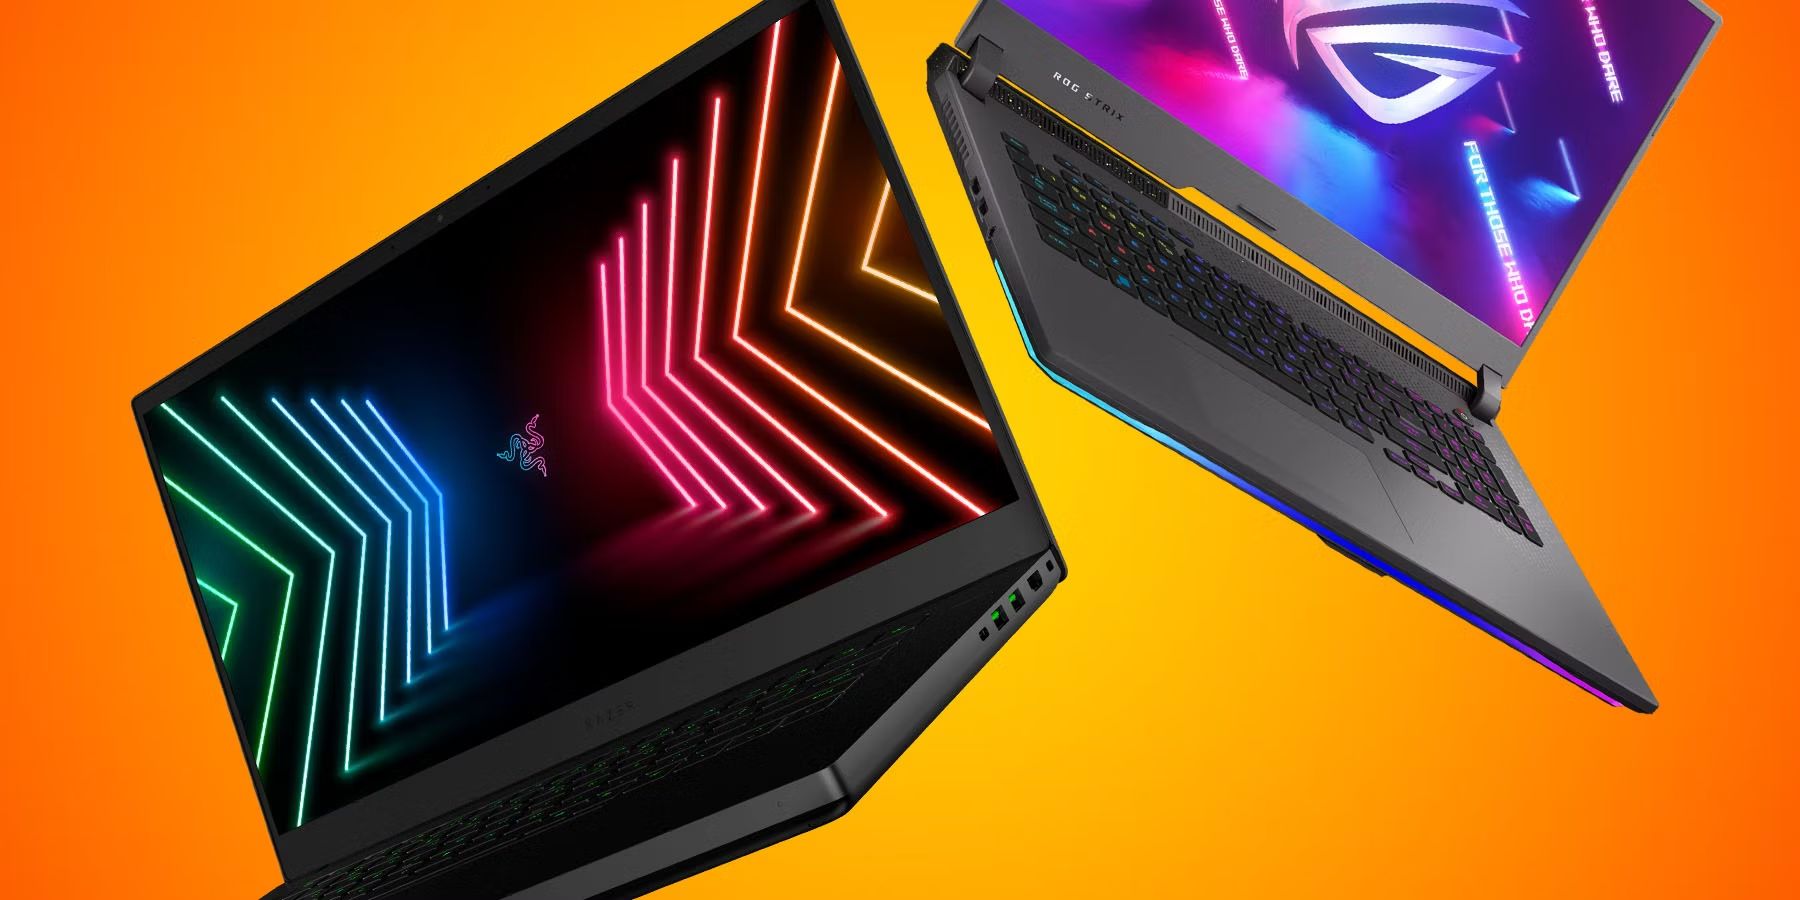 How To Find The Best Deals On Gaming Laptop